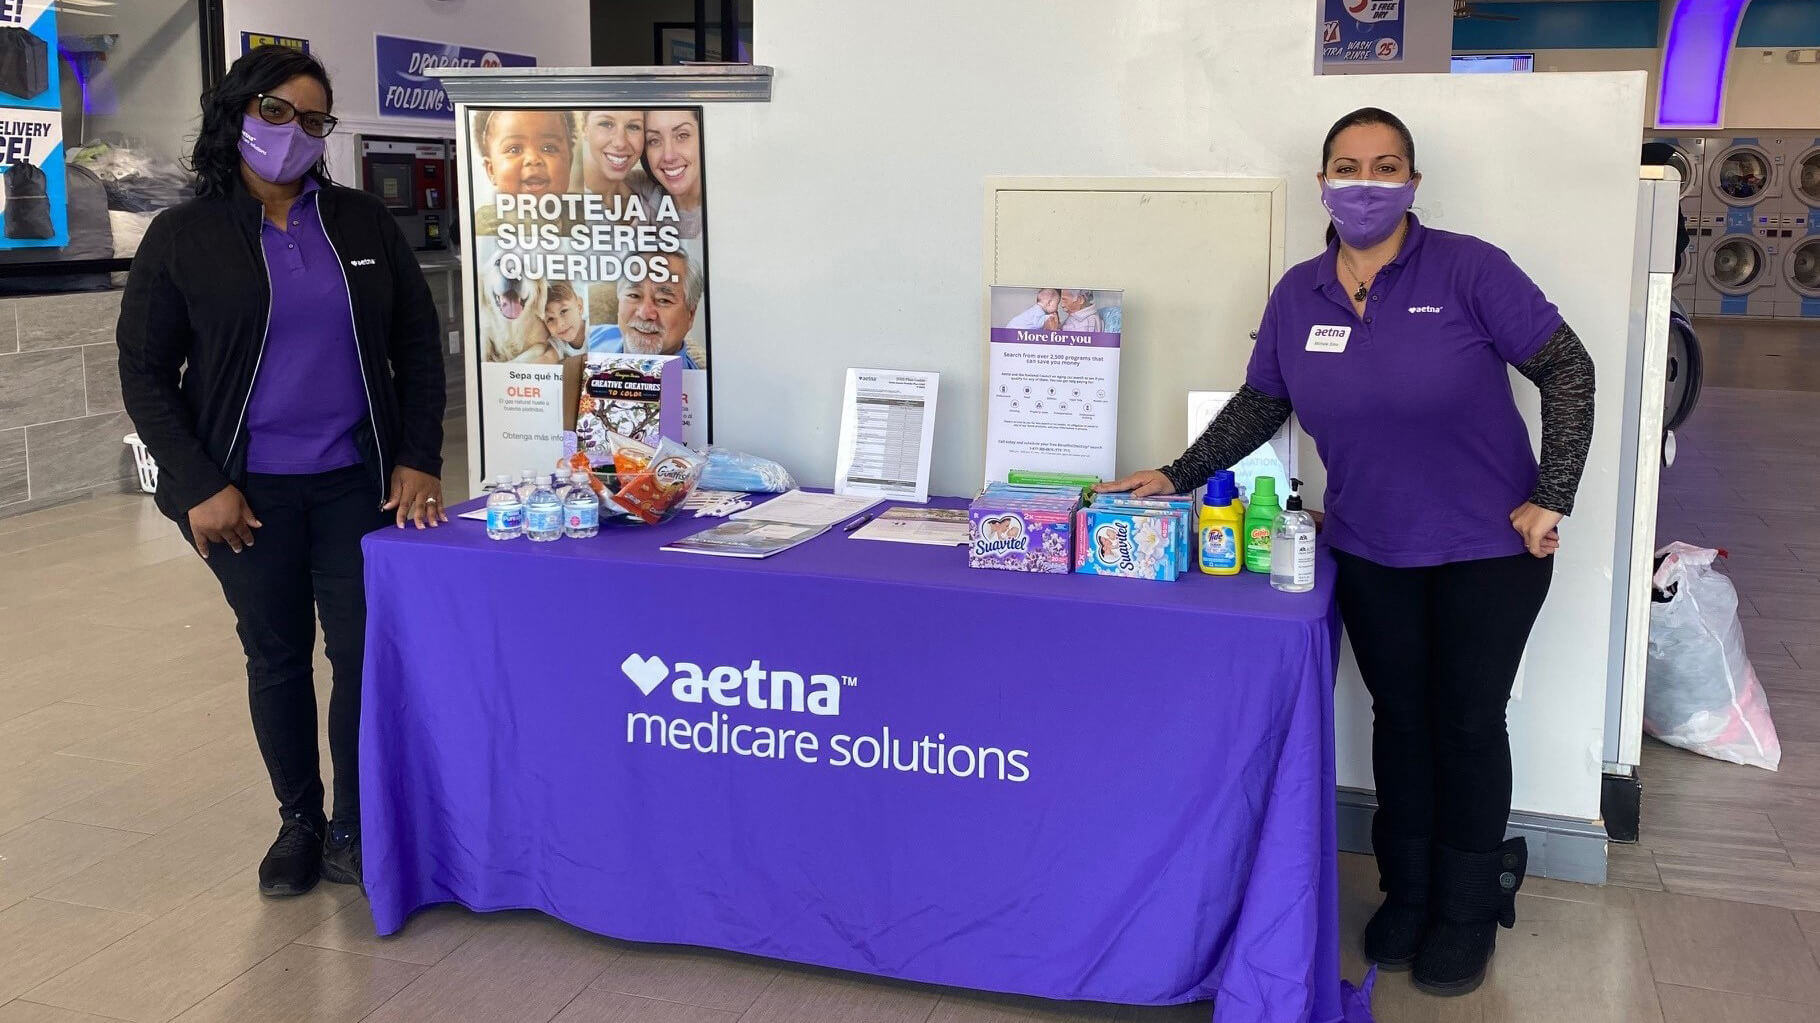 Two masked Aetna representatives provide free laundry products from a table stocked with products.